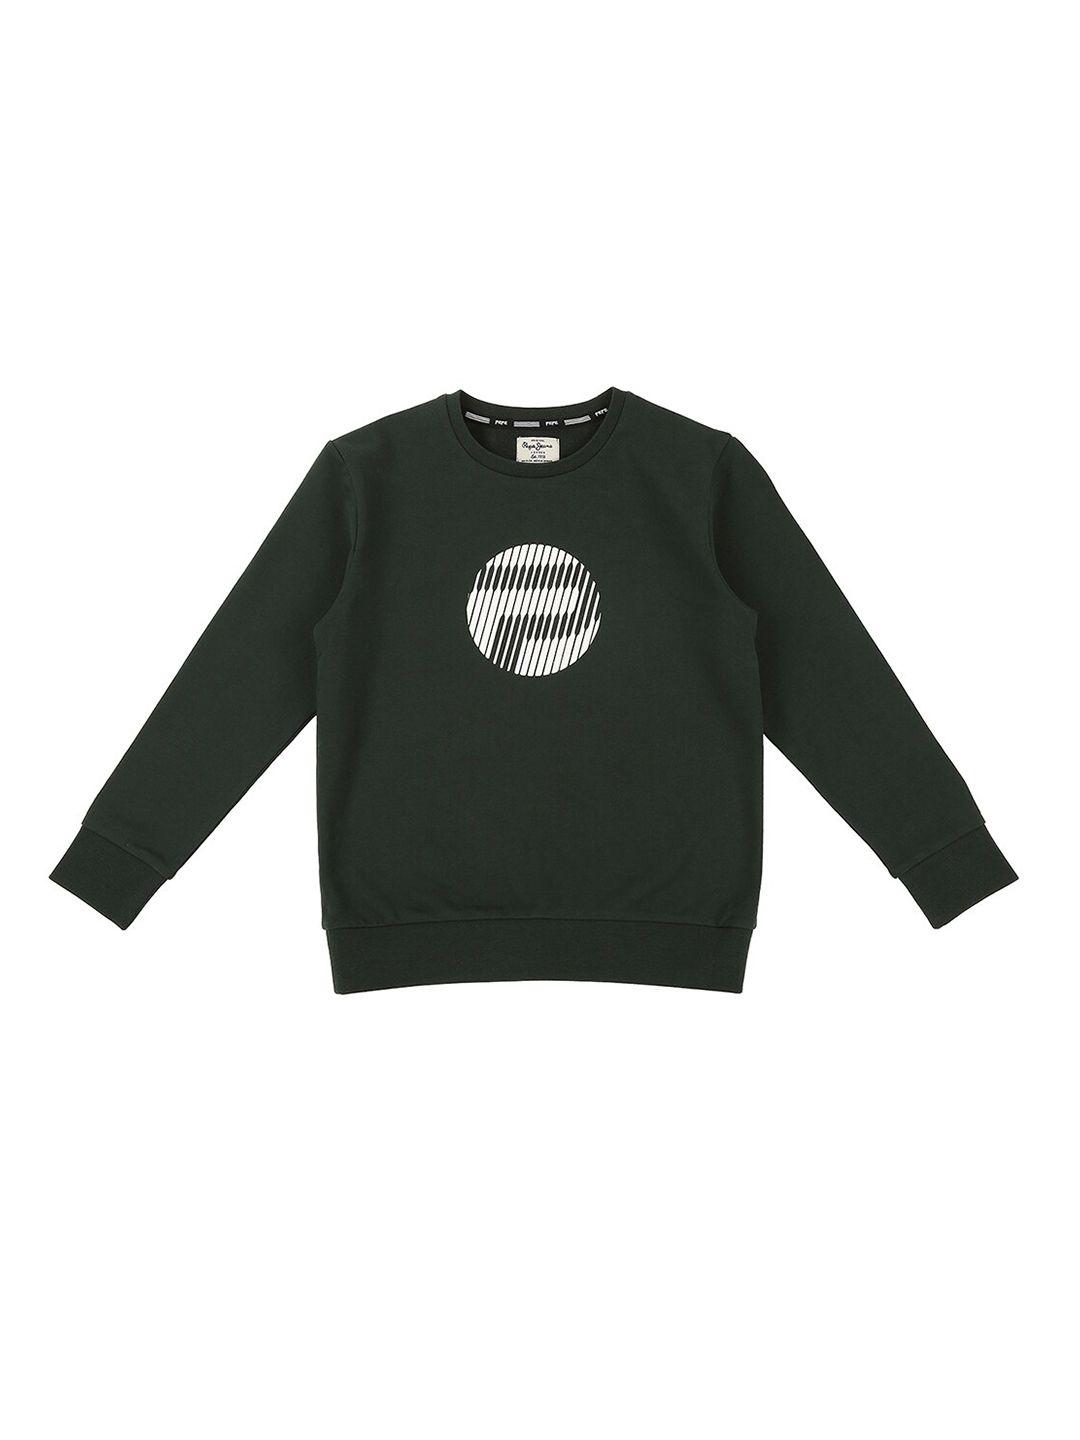 pepe-jeans-boys-green-placement-printed-sweatshirt